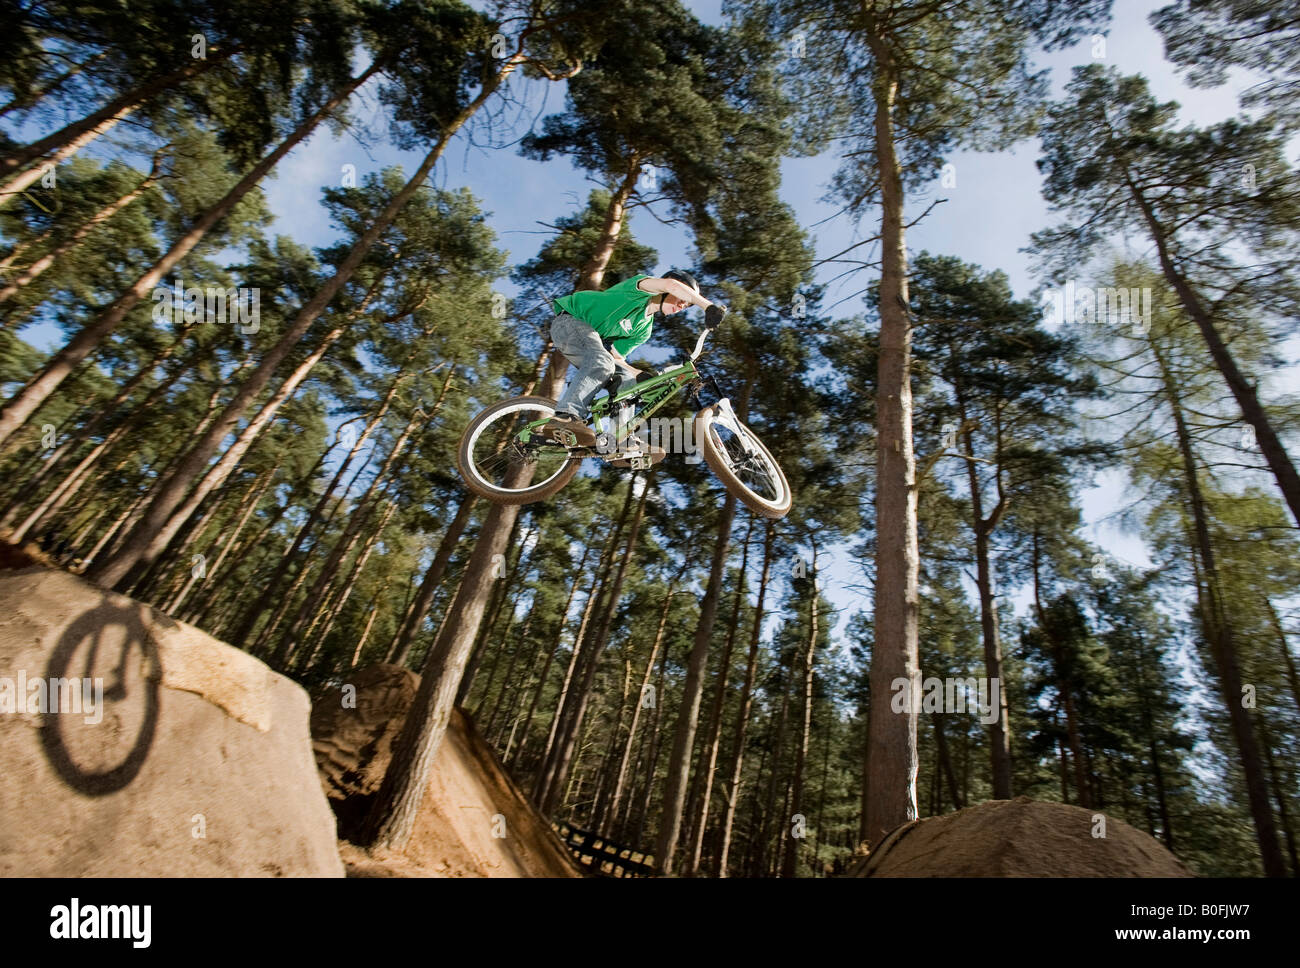 mountain bike dirt jump trick stunt air leap bmx mountain bikes MTB BMX  dirt jumper pulls stunts in trees sick whip youth sport Stock Photo - Alamy